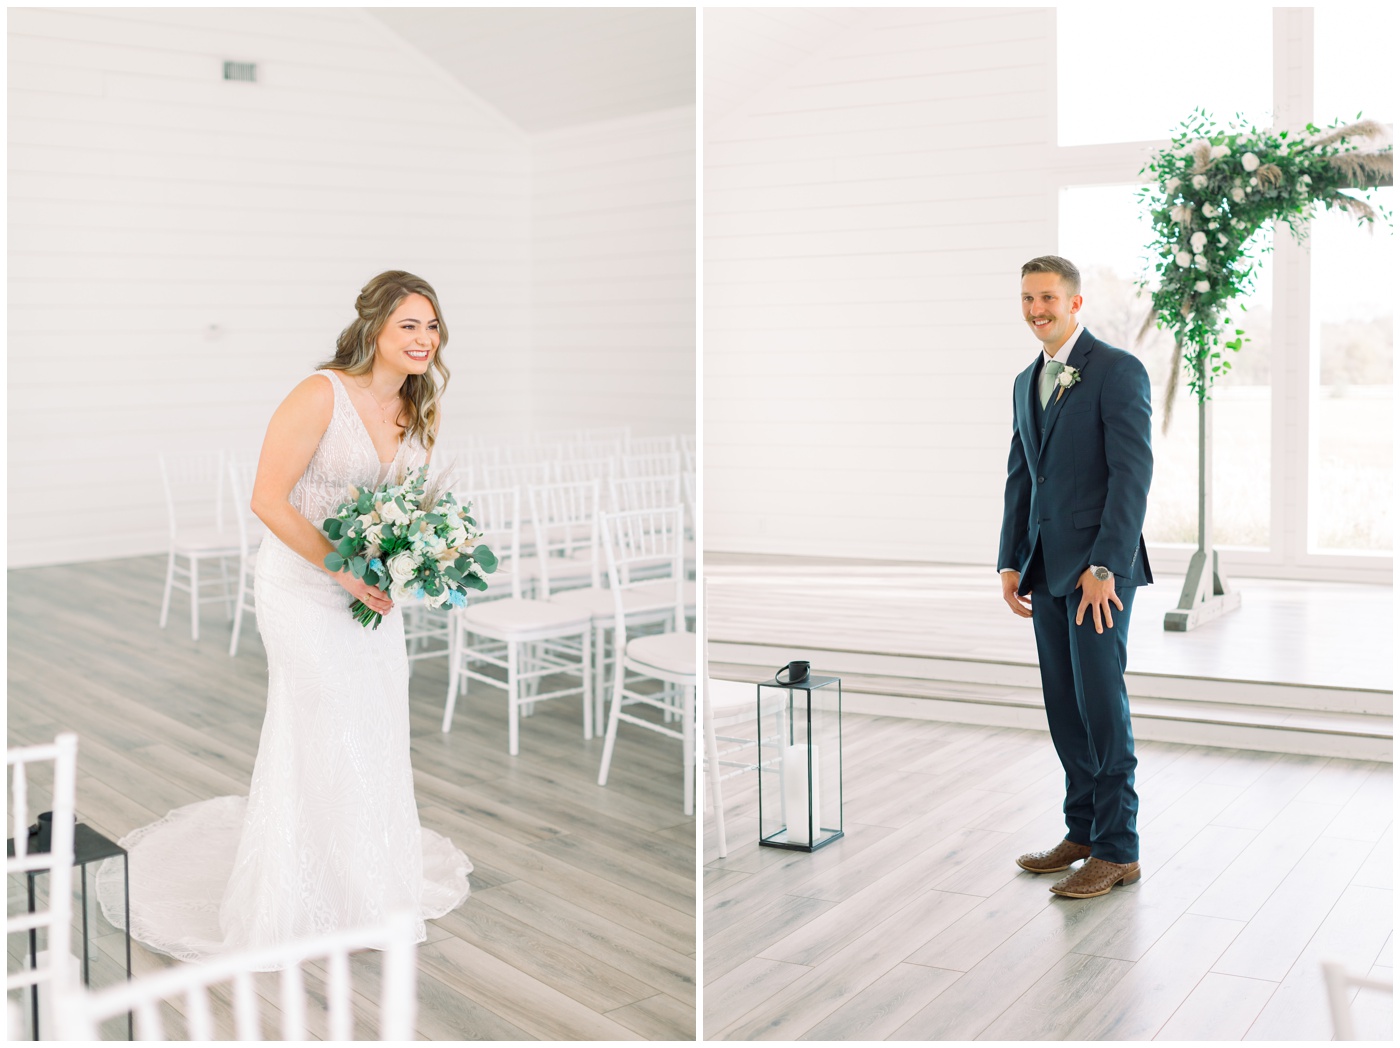 the bride and groom smile as they see each other for the first time during their first look